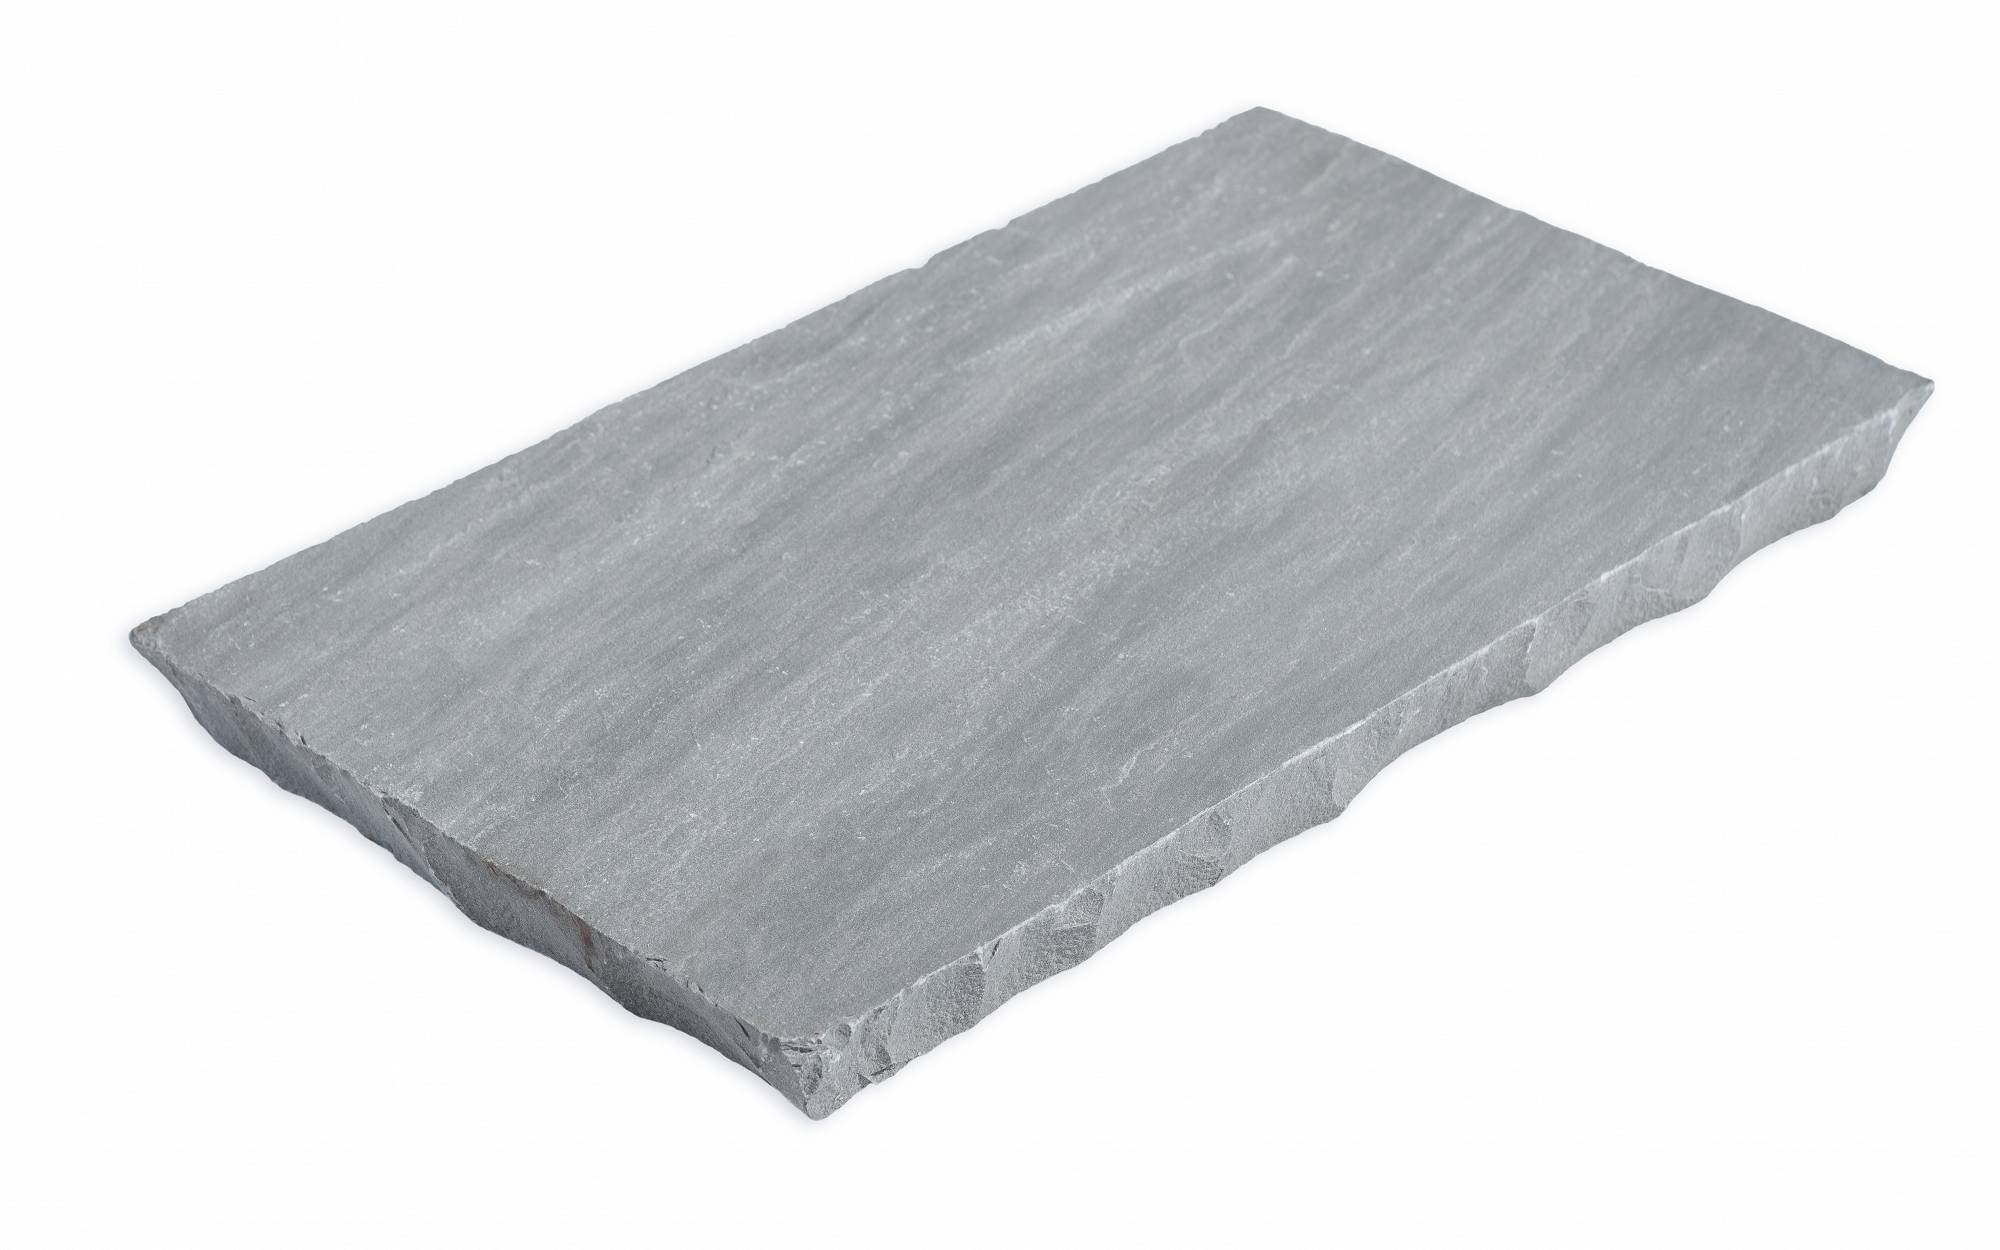 appalachian grey old world flagstone artisan paver cap molding 10 by 24 by 1 and half  inch exterior applications manufactured by f and m supply distributed by surface group